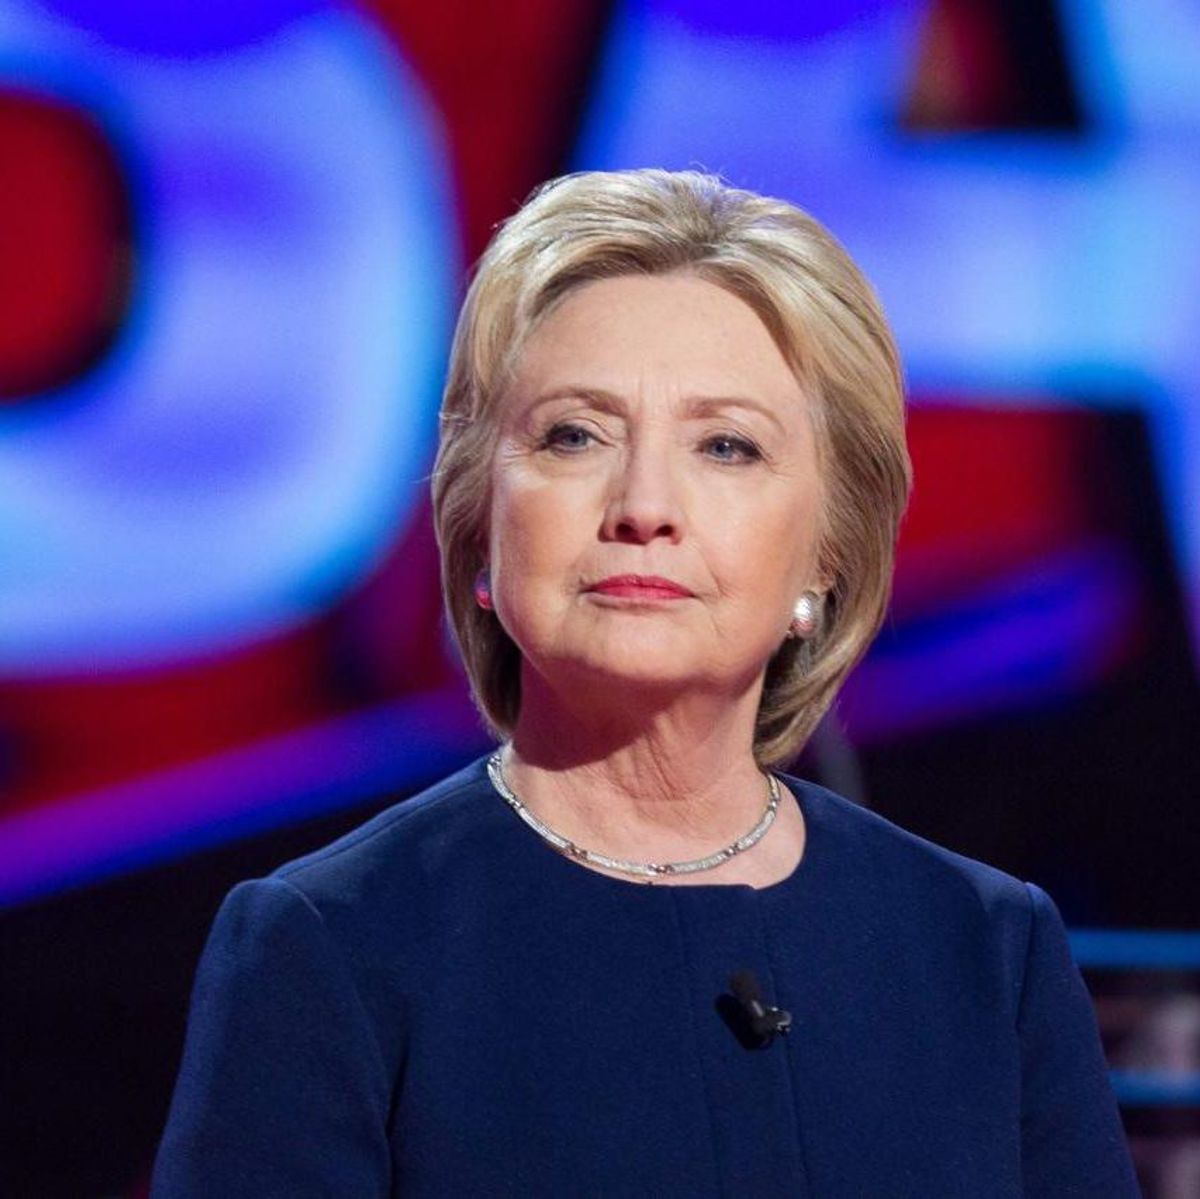 Why Hilary Clinton Should Have Picked a Female VP (And Five Women She Could Have Chosen)